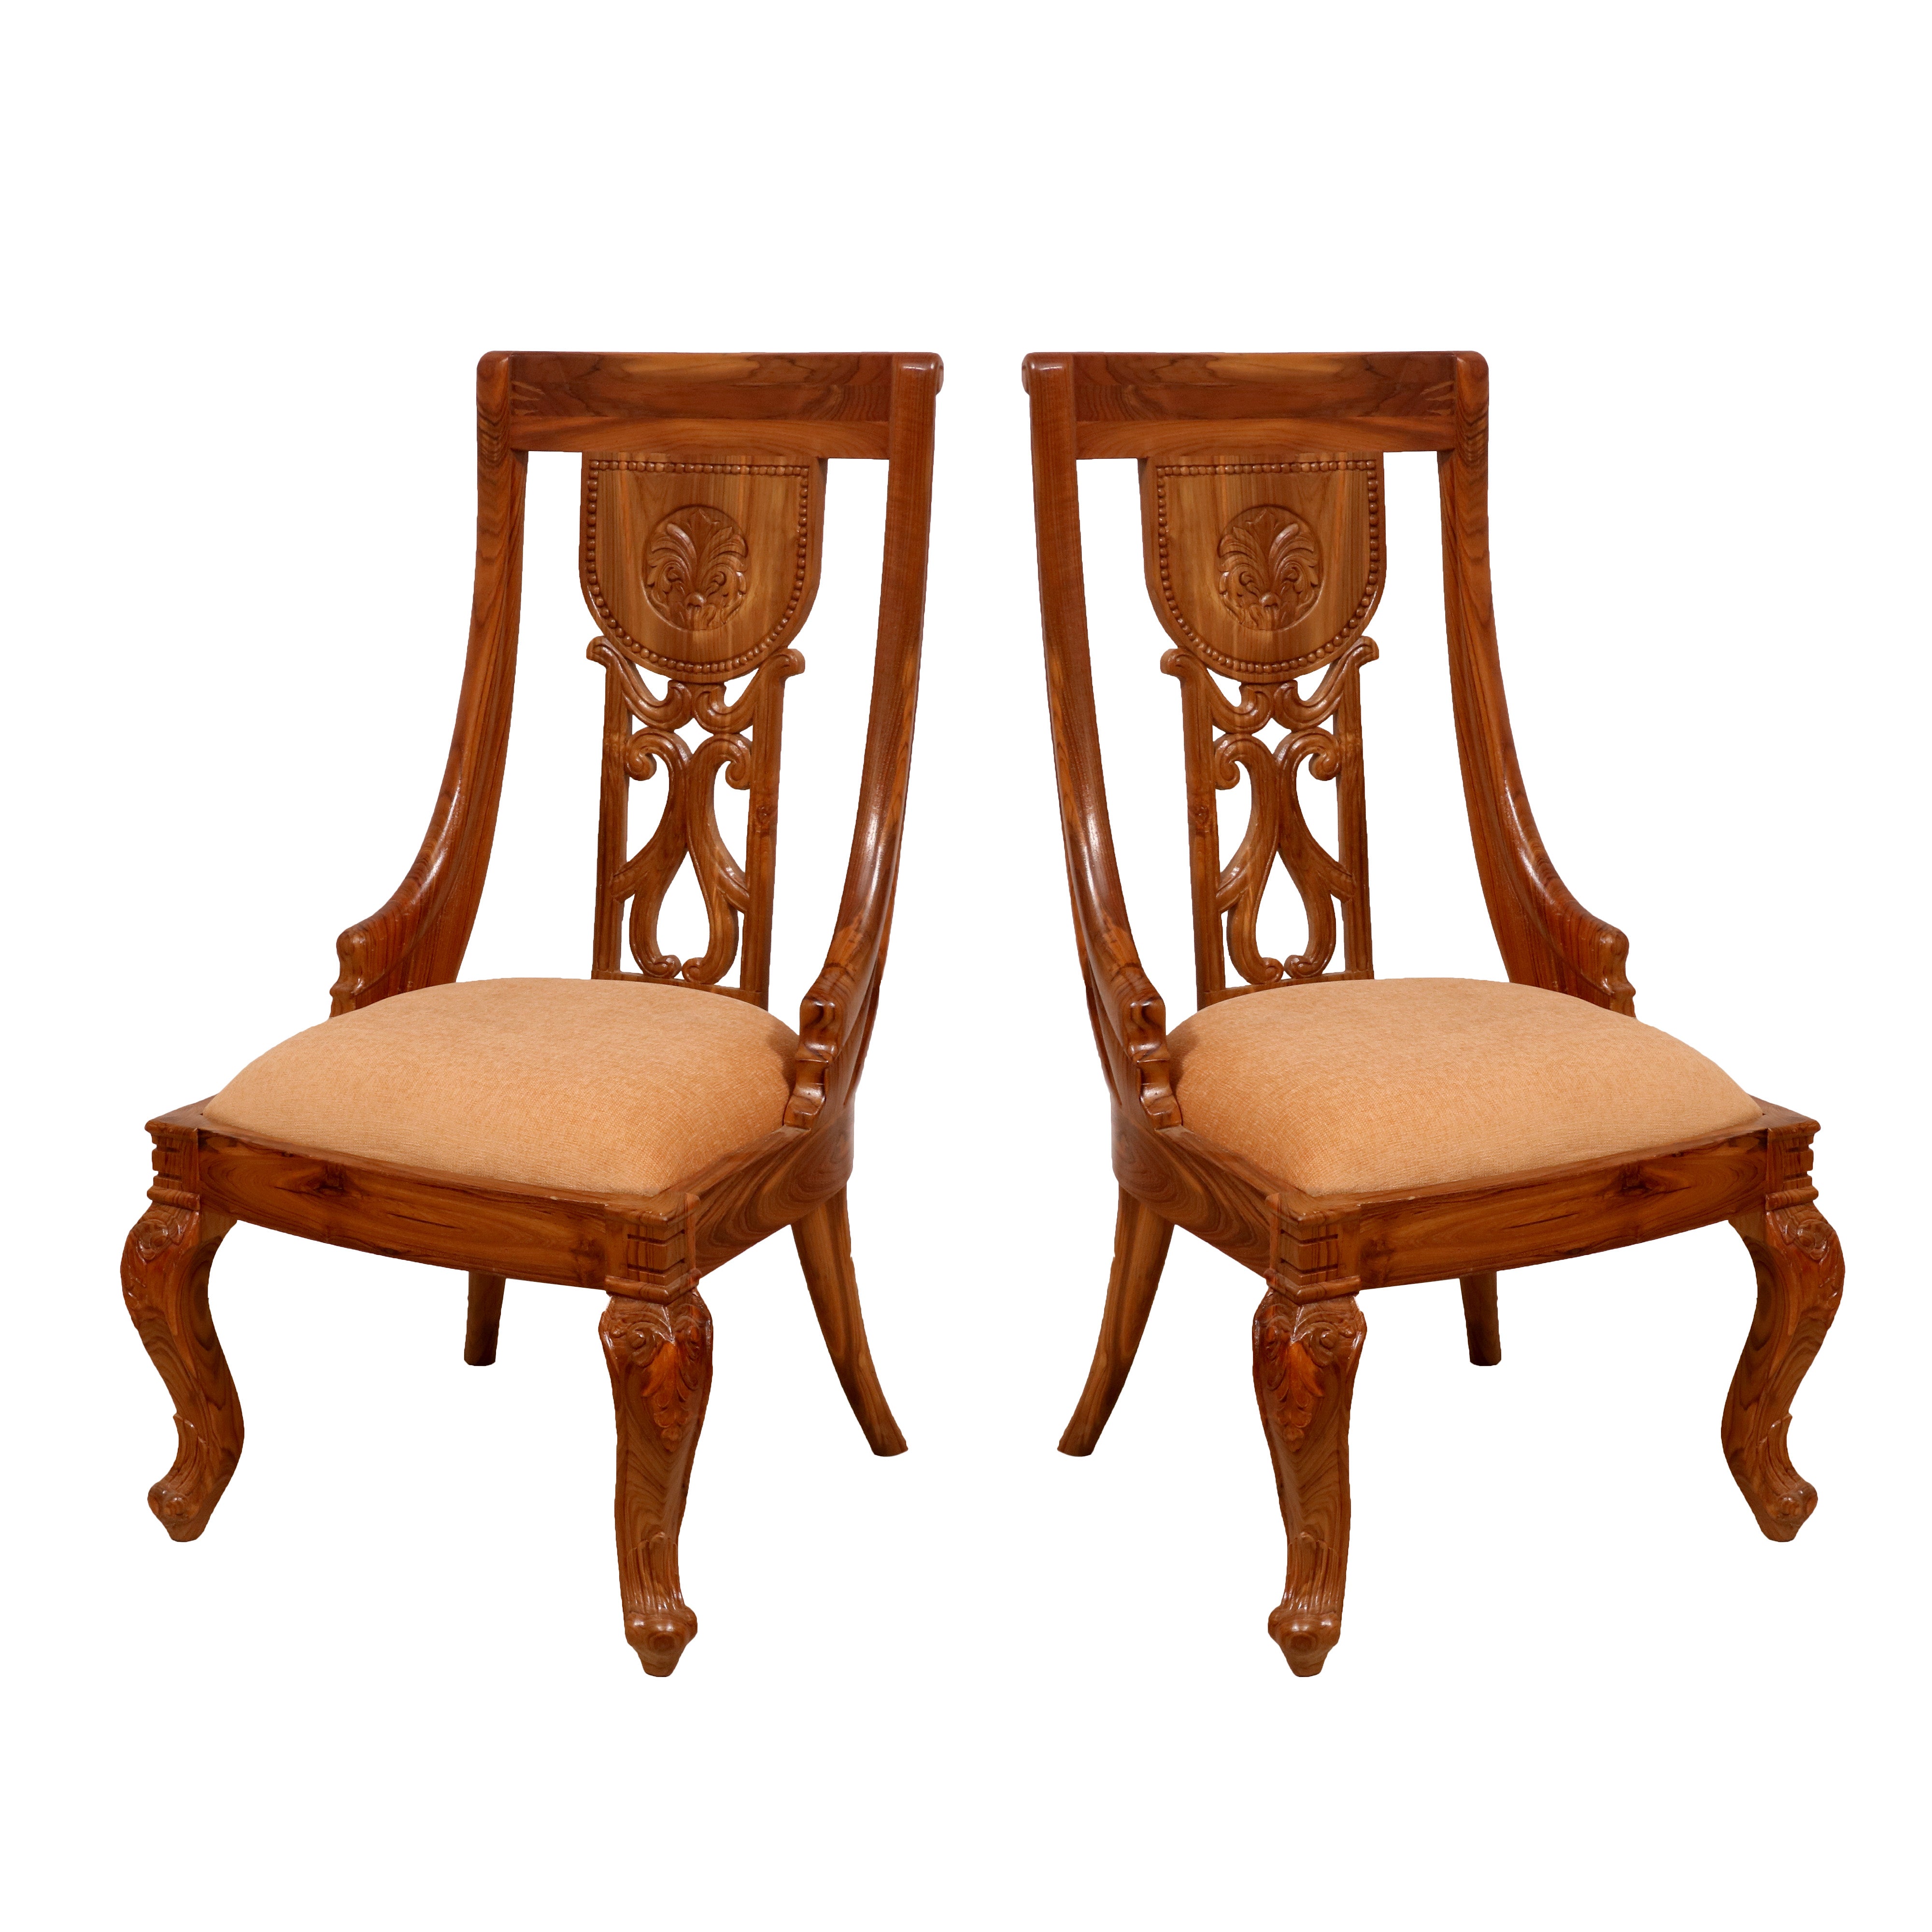 (Set of 2) Regal Carved Wooden Chair Dining Chair